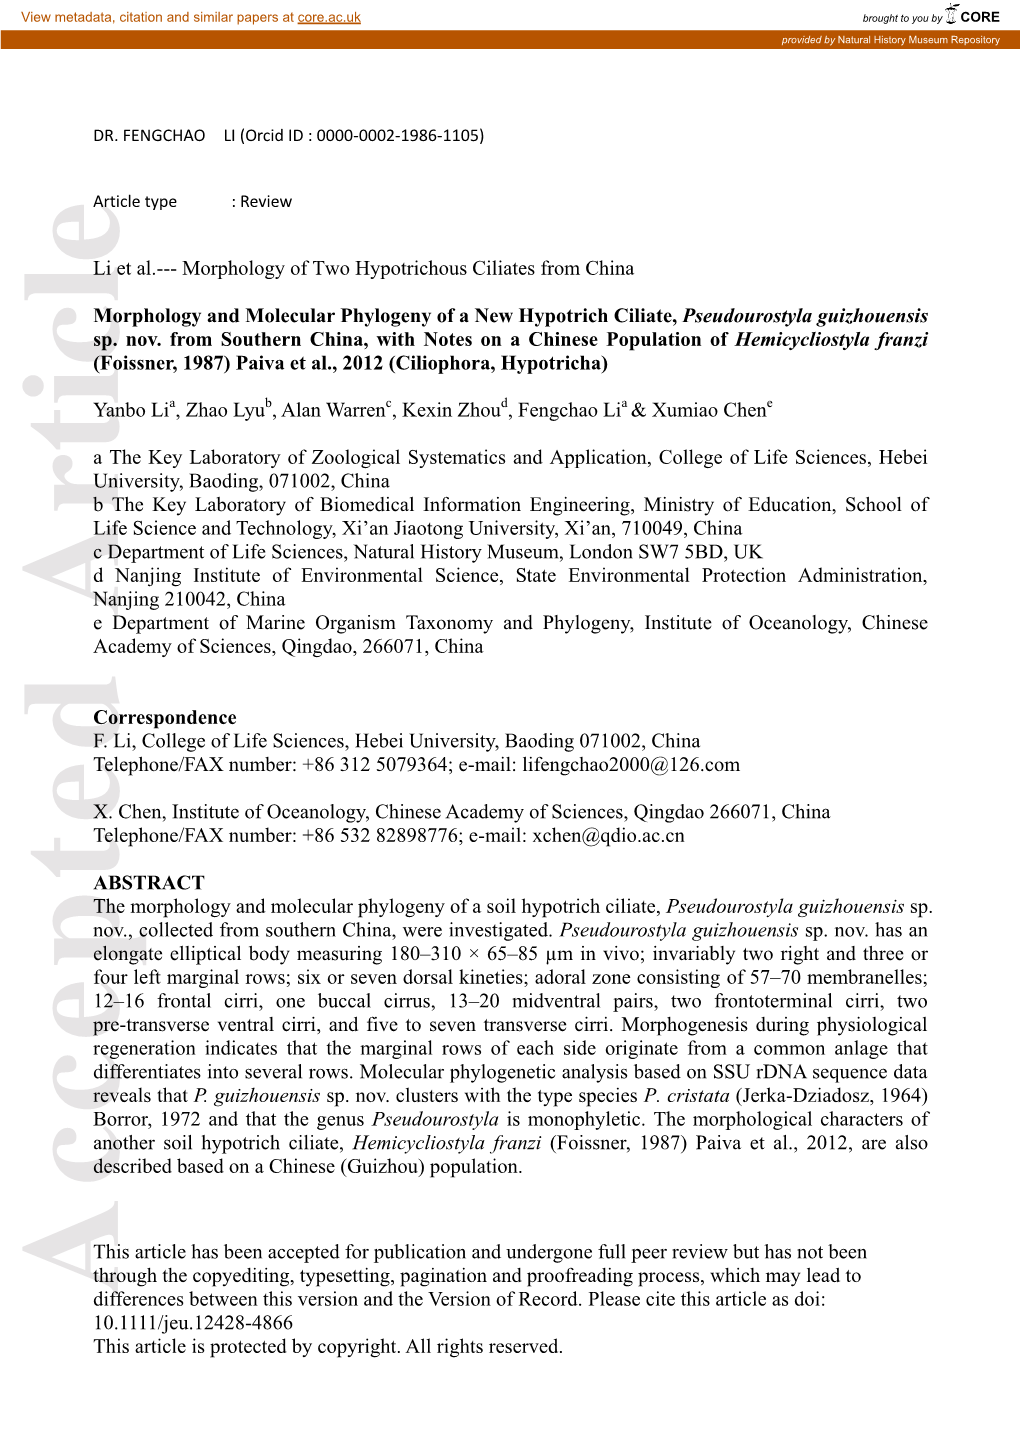 Morphology and Molecular Phylogeny of a New Hypotrich Ciliate, Pseudourostyla Guizhouensis Sp. Nov. from Southern China, with No